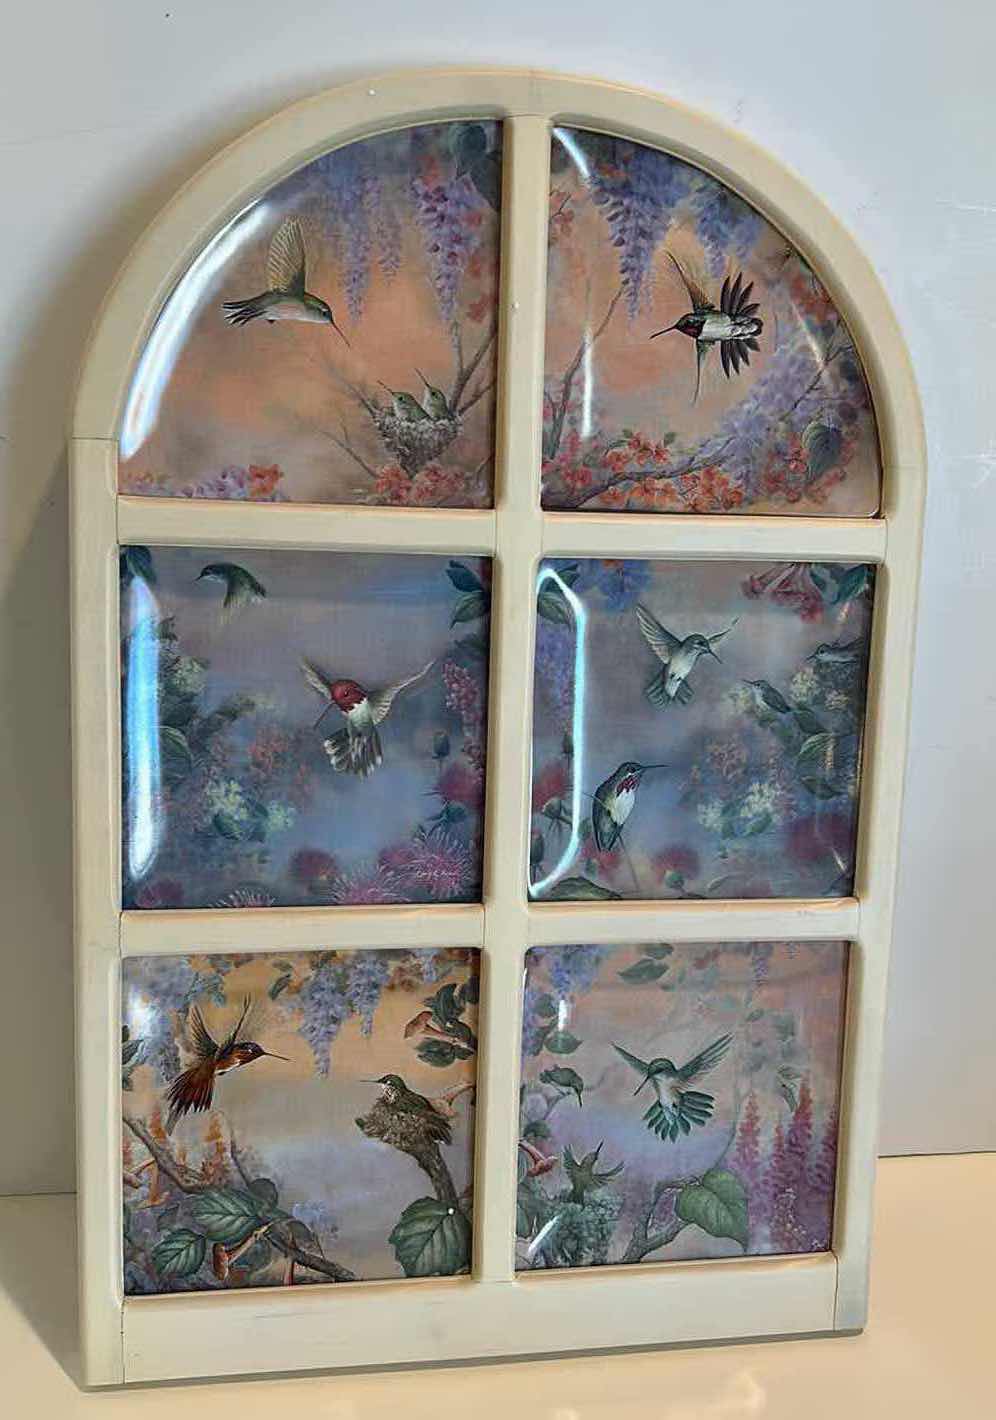 Photo 1 of WINDOW PANE WITH 6 COLLECTIBLE PORCELAIN “A GARDEN OF LITTLE JEWELS” PLATES NUMBERED BY LARRY MARTIN 14 1/4” x 22 1/4”